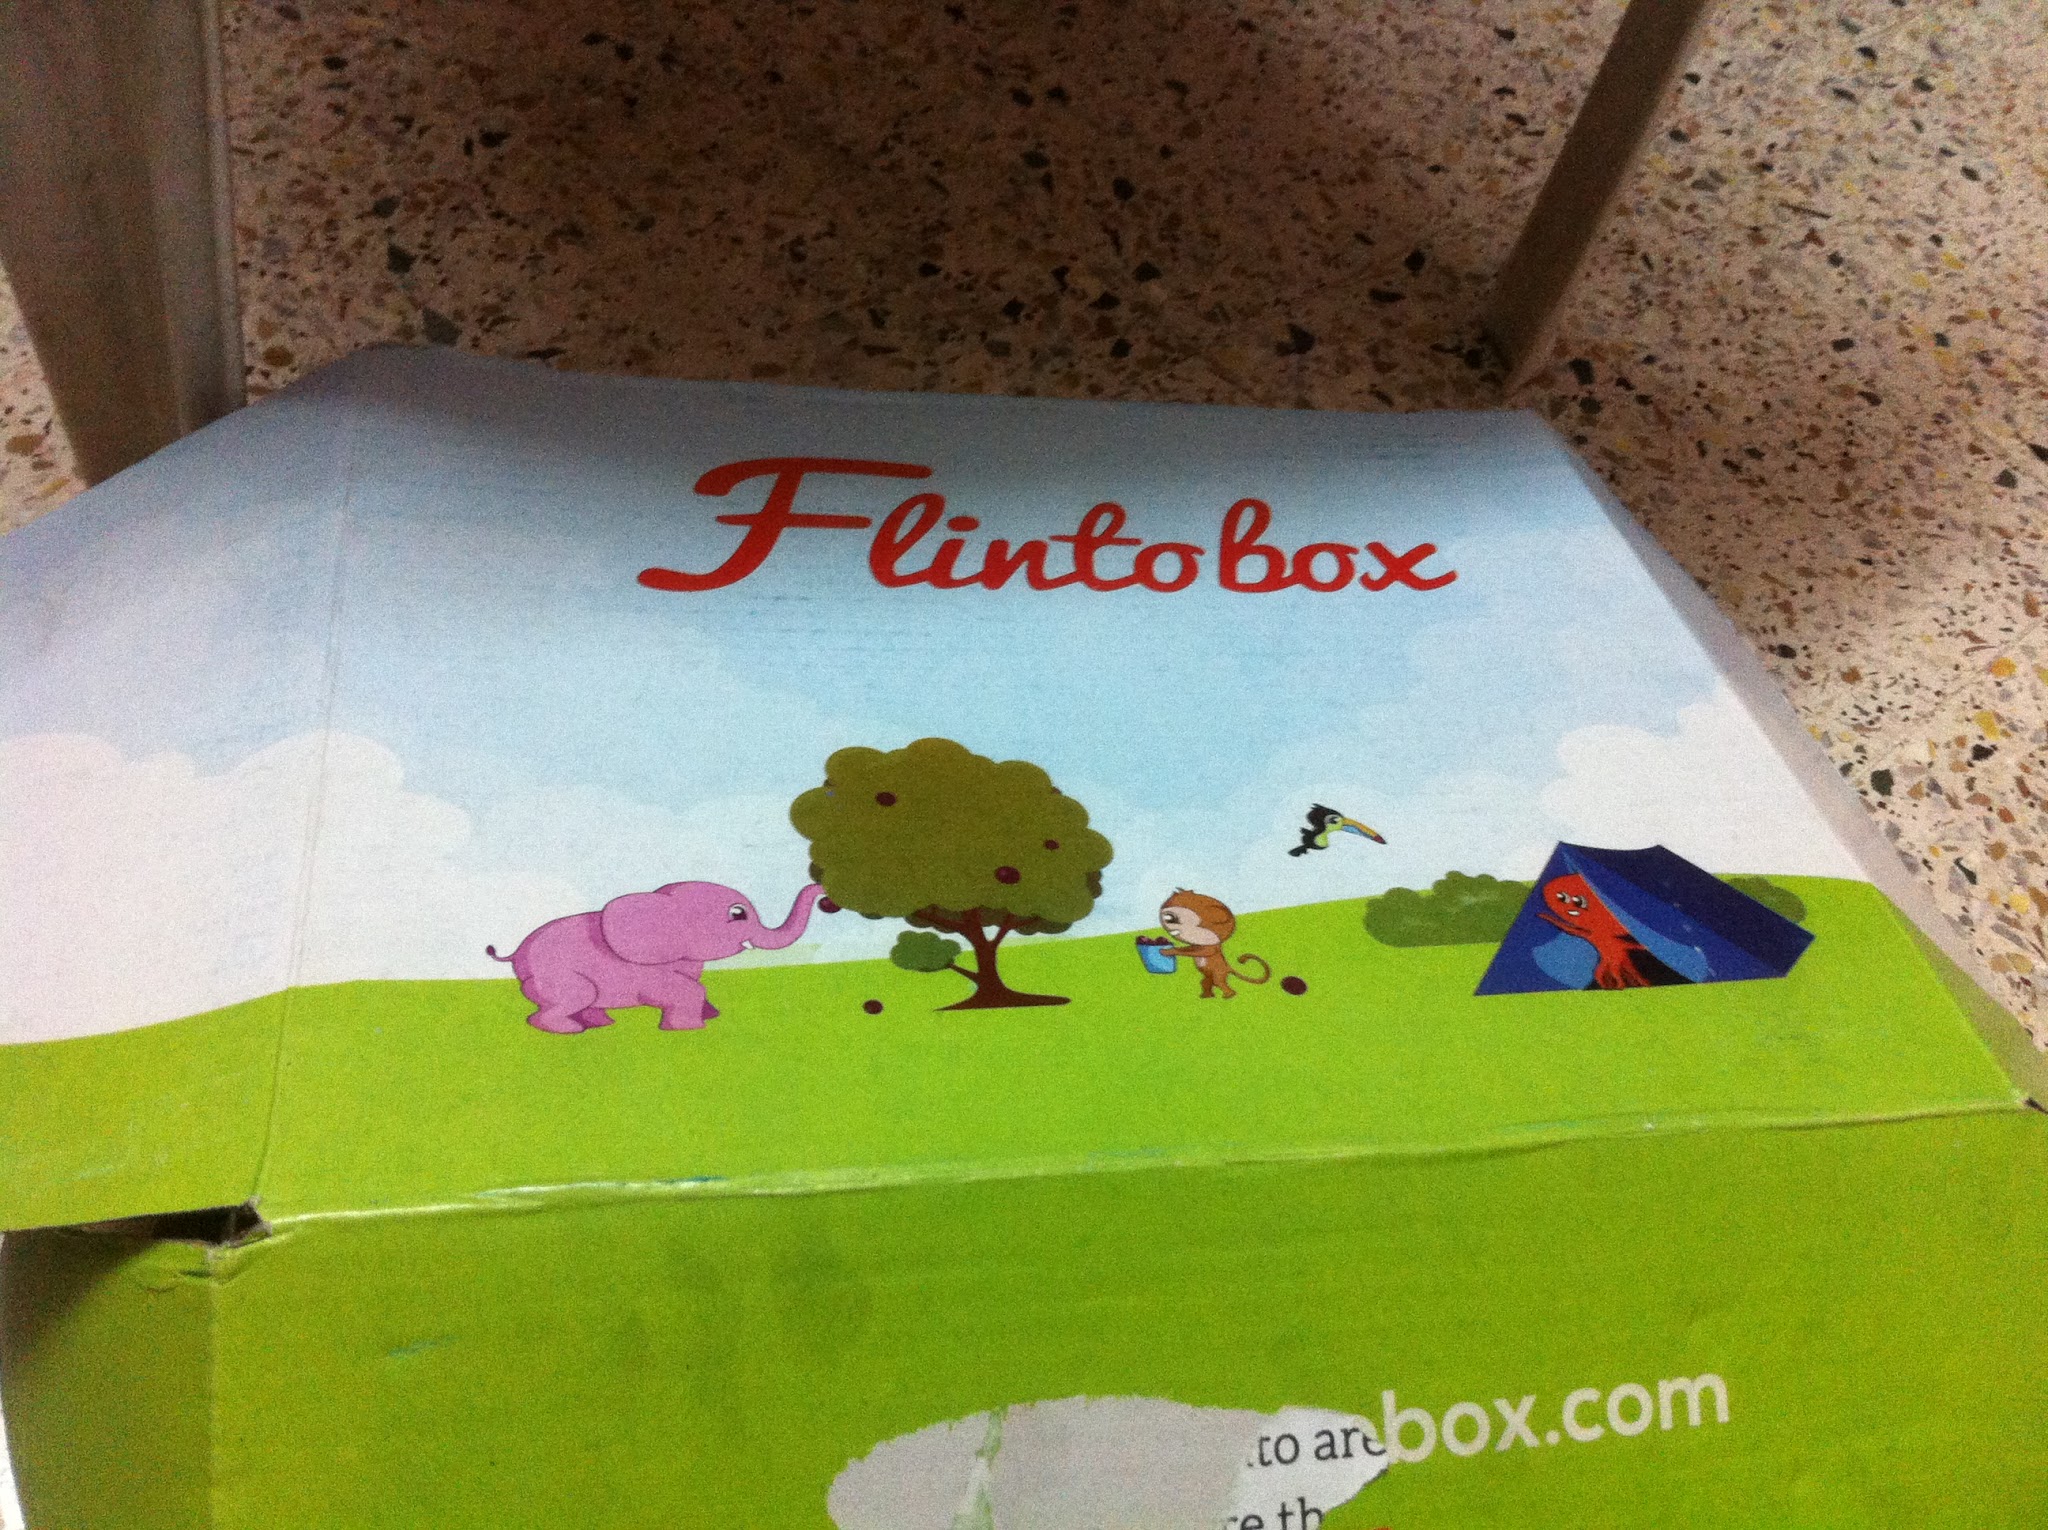 Fantastic Feathers: A day with Flintobox